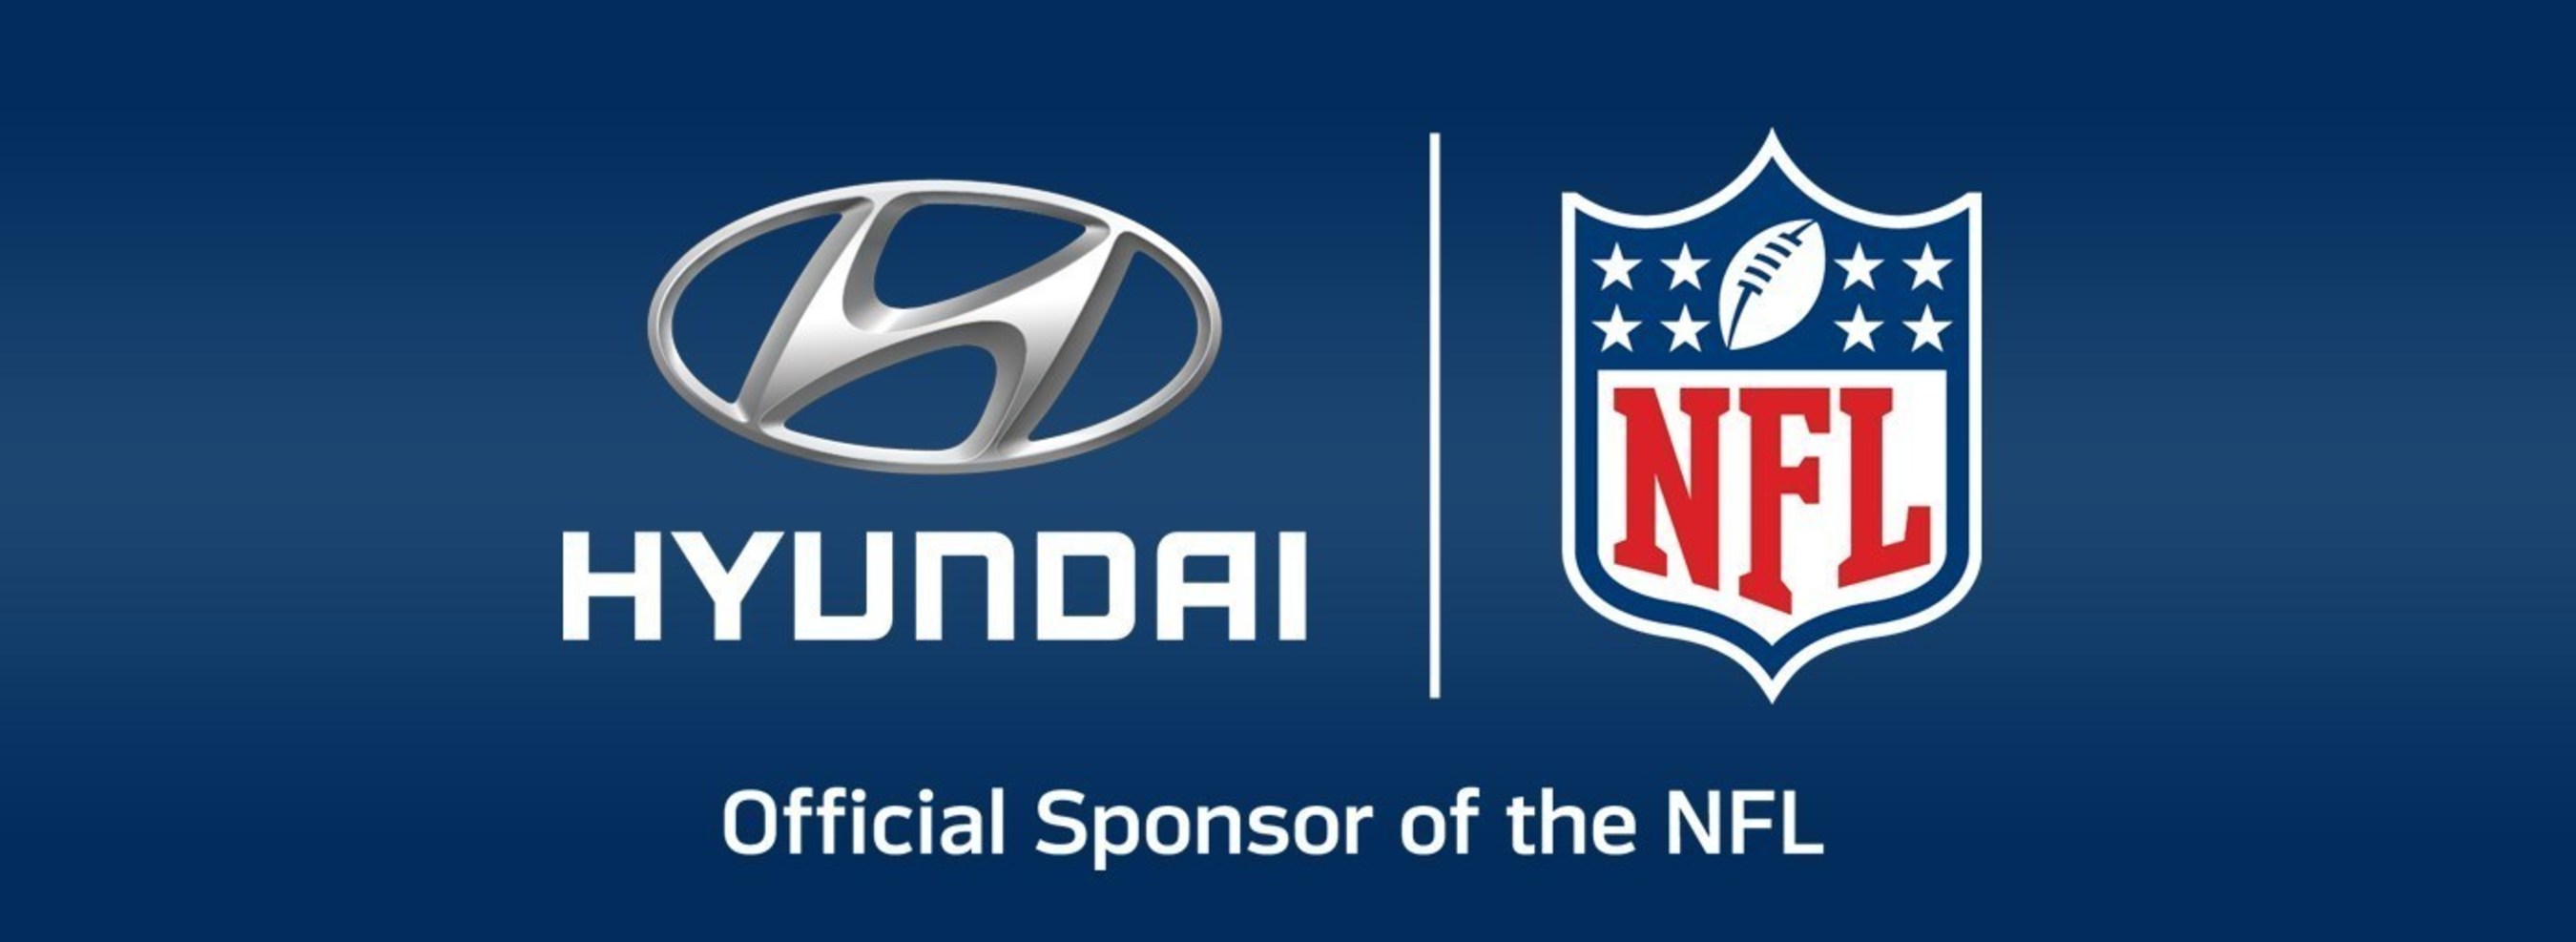 Hyundai is now an official sponsor of the National Football League.